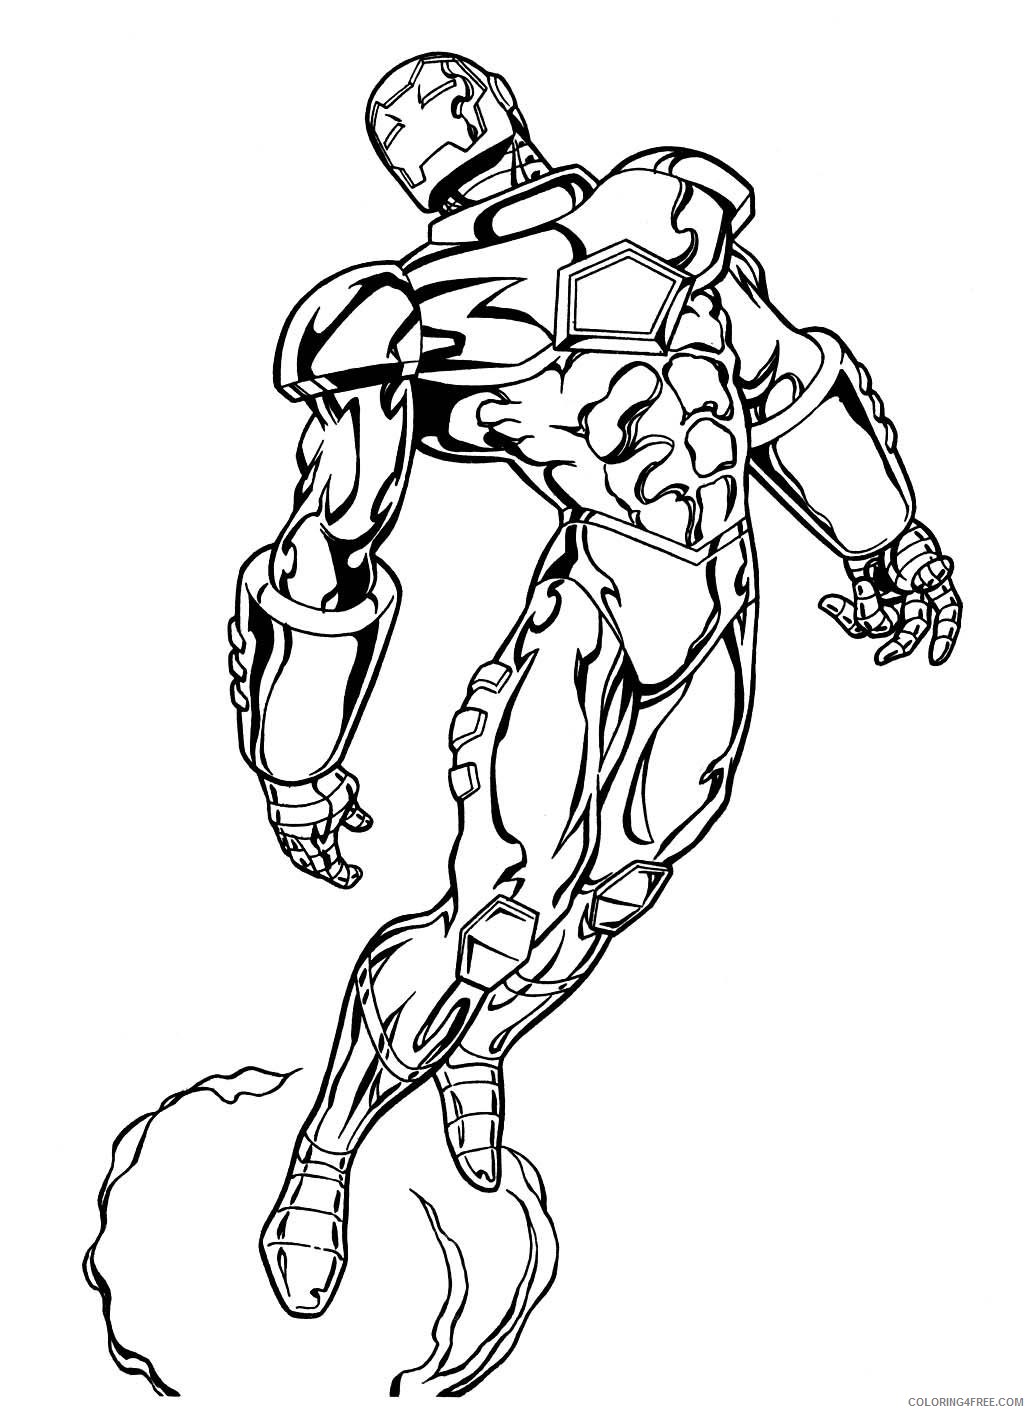 iron man marvel coloring pages Coloring4free